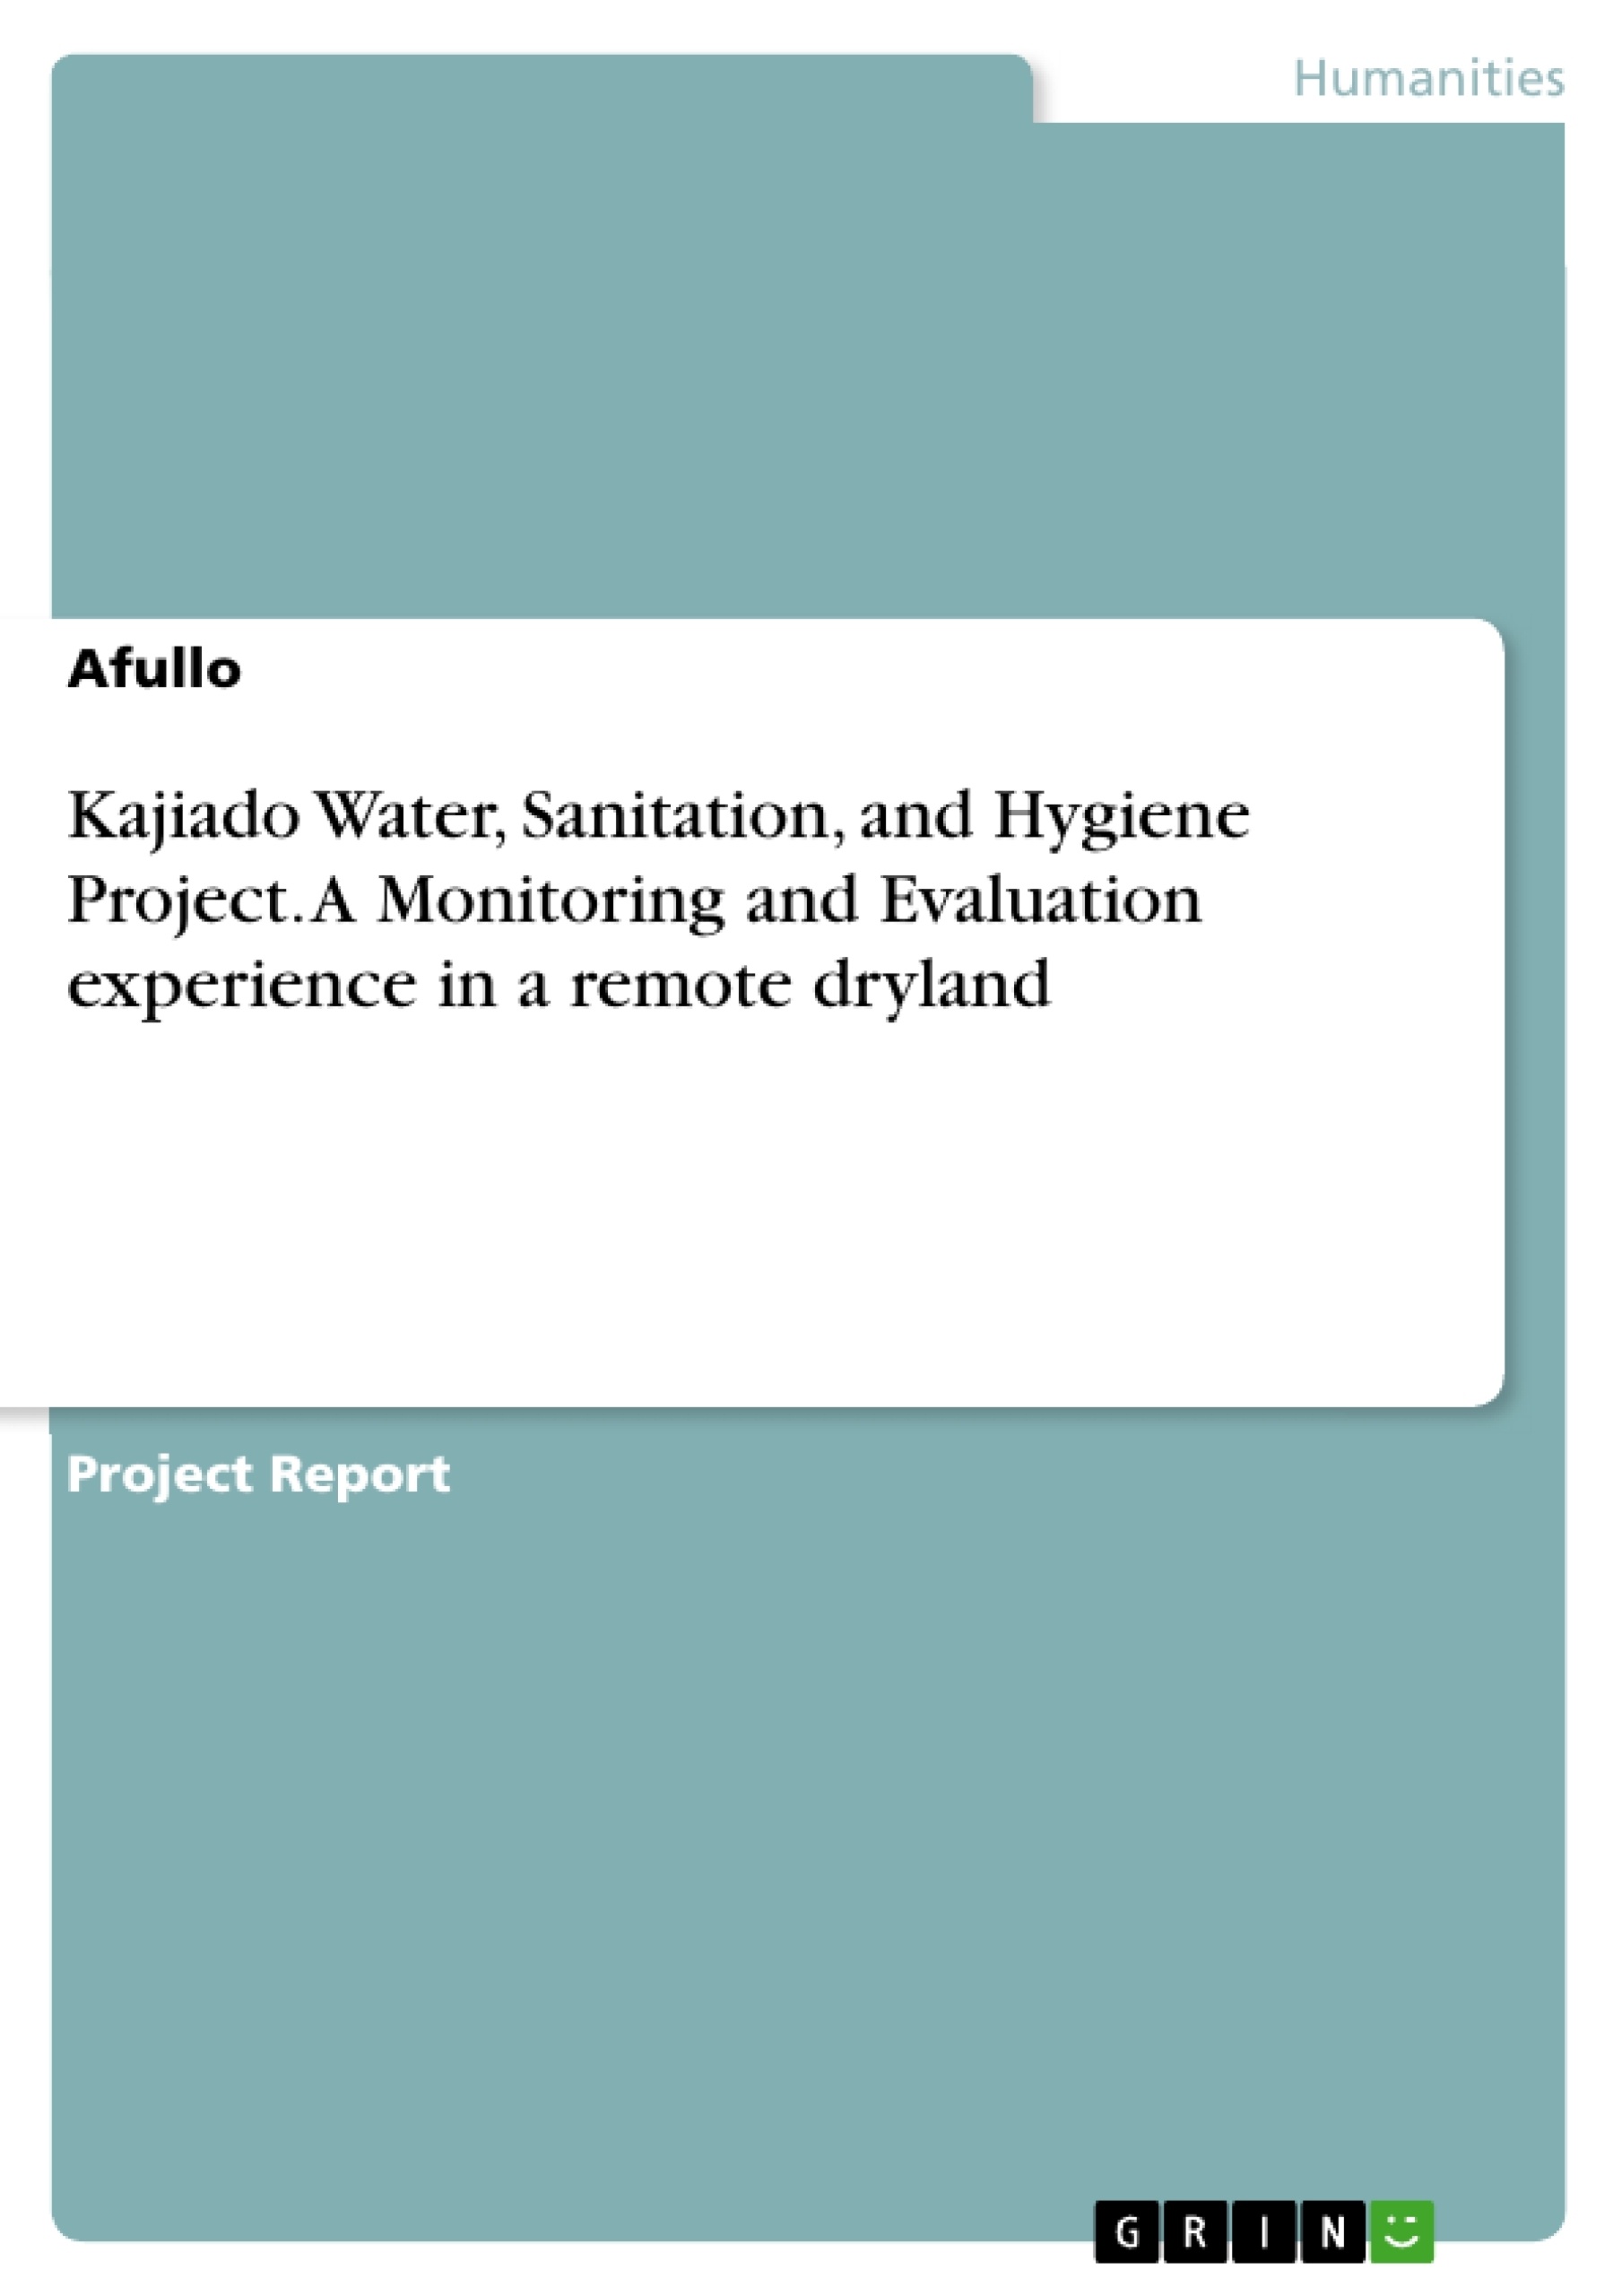 Title: Kajiado Water, Sanitation, and Hygiene Project. A Monitoring and Evaluation experience in a remote dryland